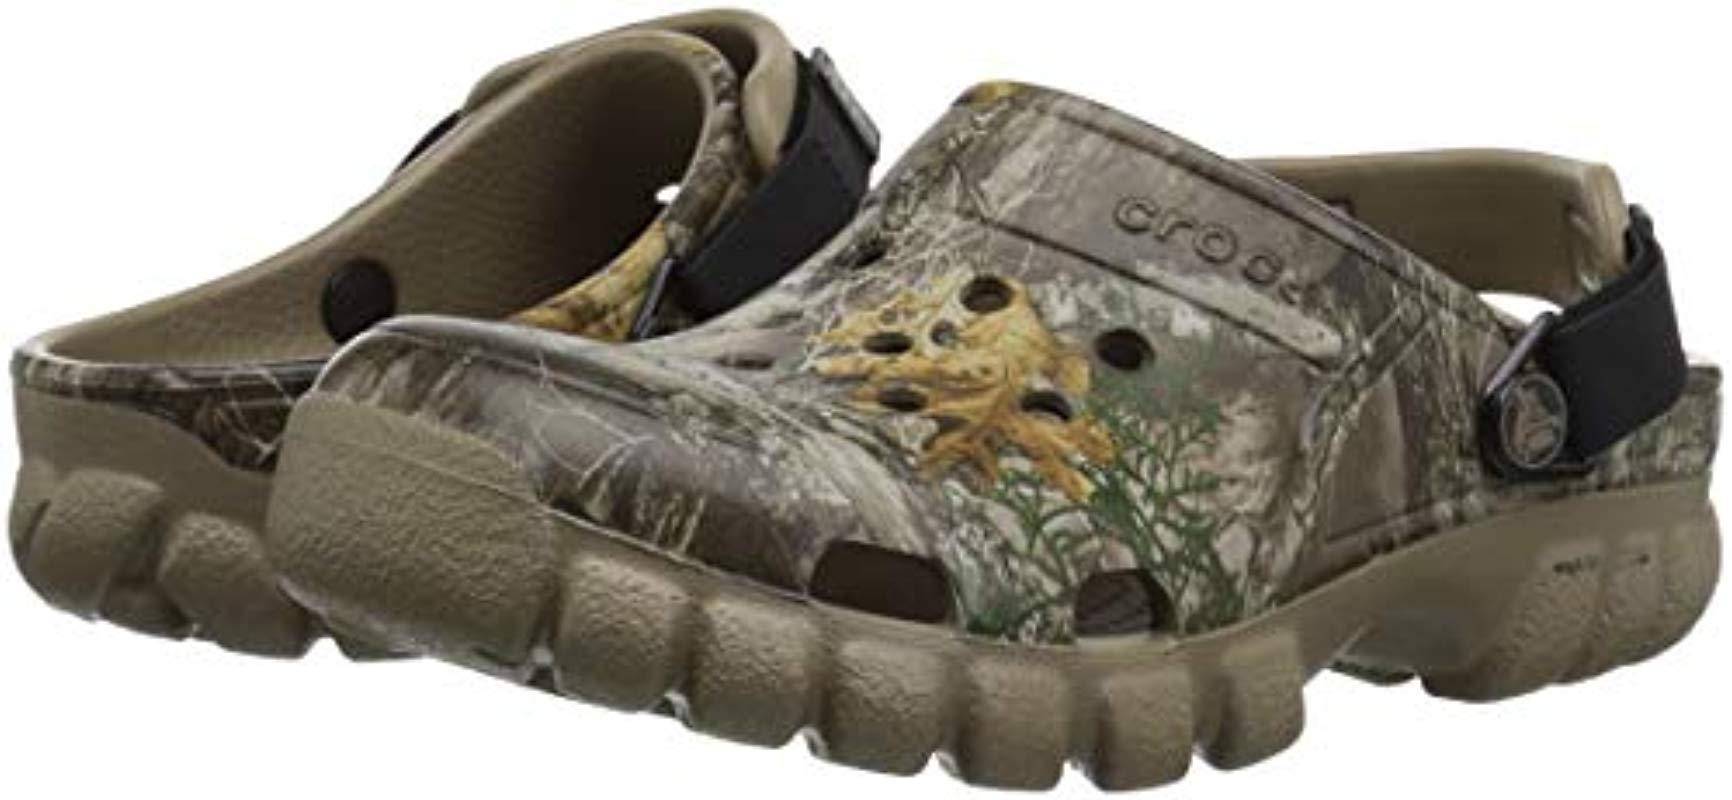 Crocs Offroad Sport Realtree EDG CLG Clog Mules & Clogs Shoes Clothing ...